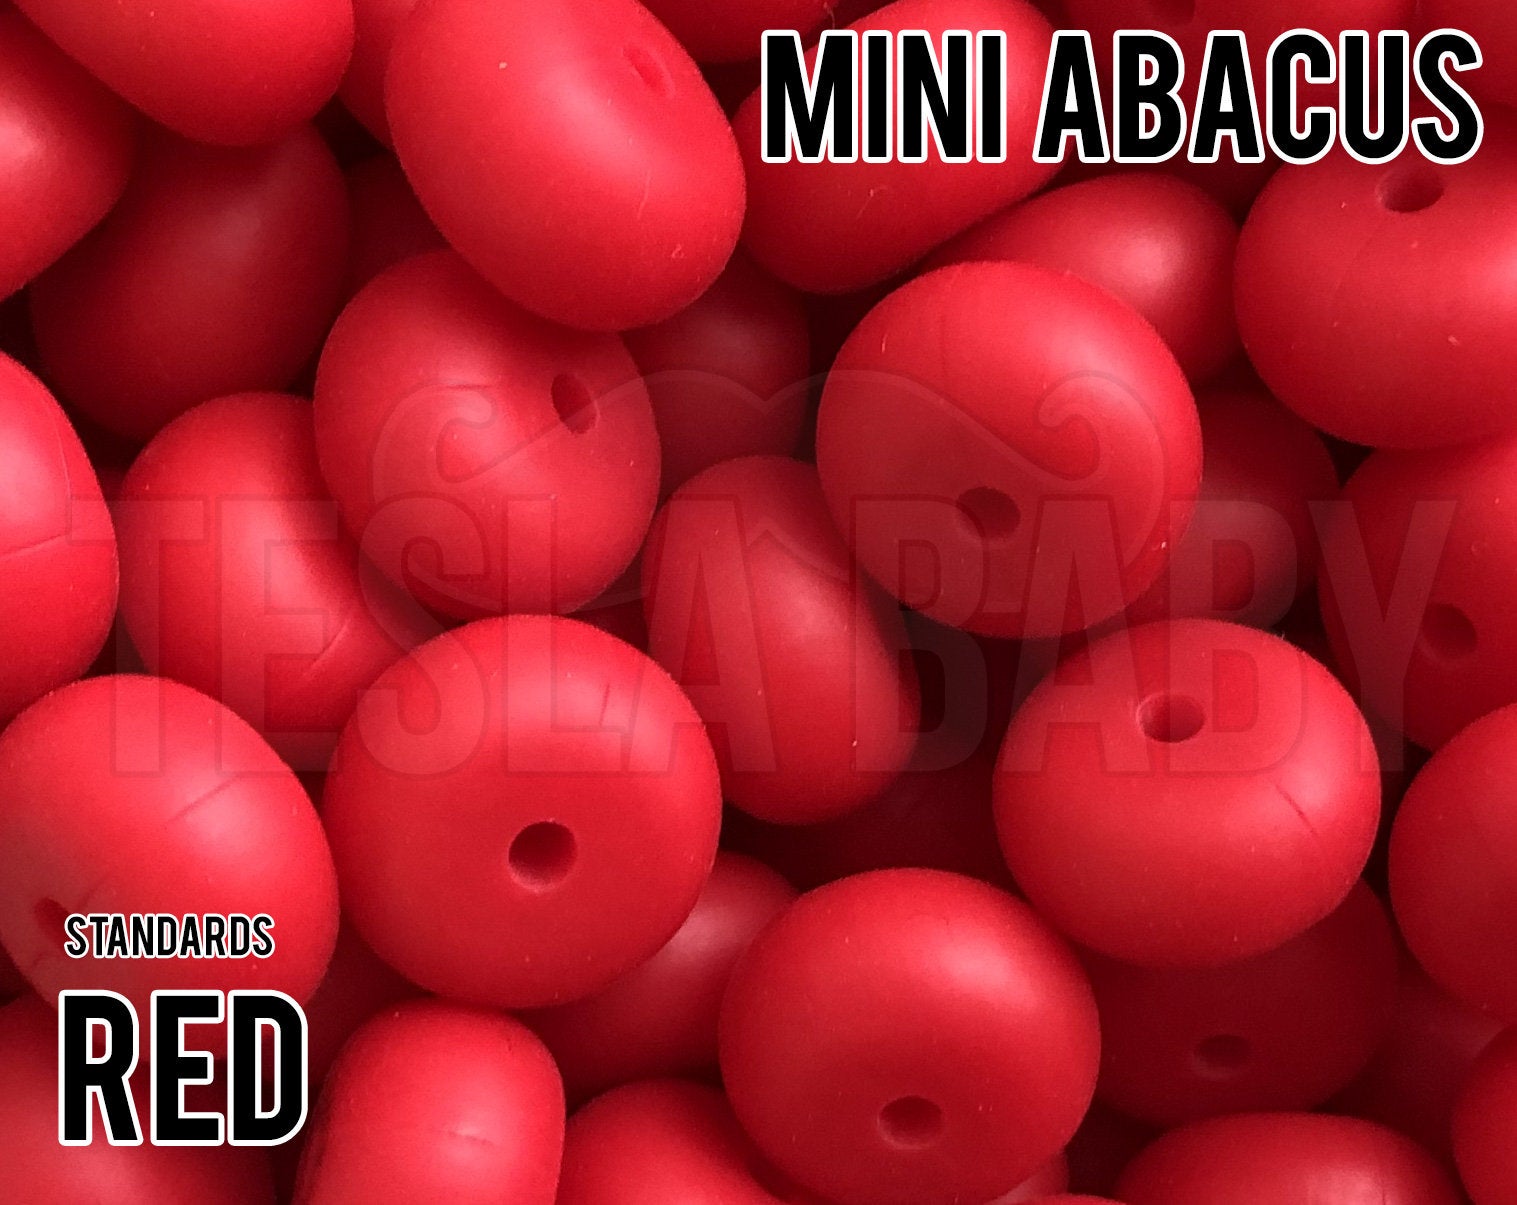 Mini Abacus Red Silicone Beads 5-1,000 (aka Scarlet Red) Bulk Silicone Beads Wholesale